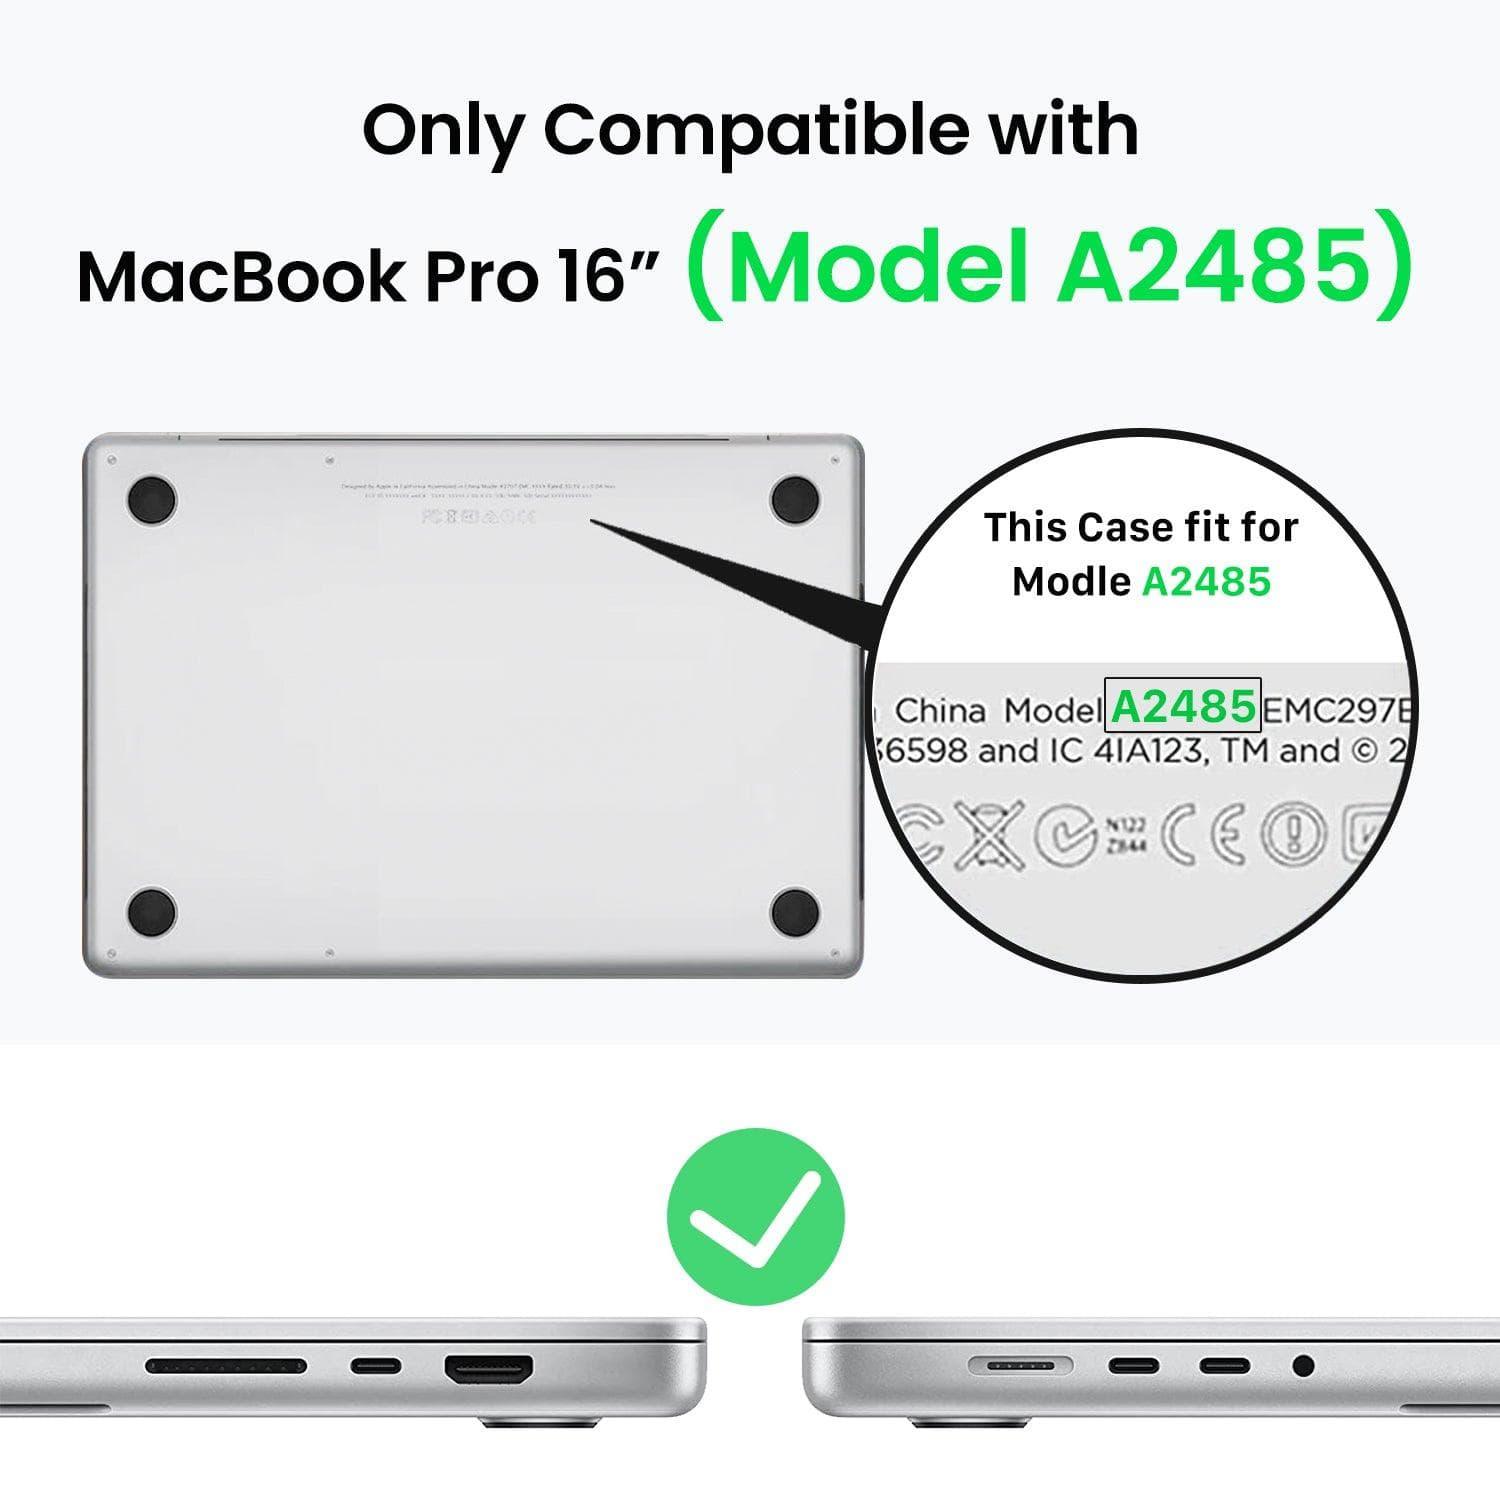 INVZI Laptops INVZ Hardshell Case for MacBook Pro 16" M2/M1 A2780, A2485 and 14" M2/M1 A2779, A2442